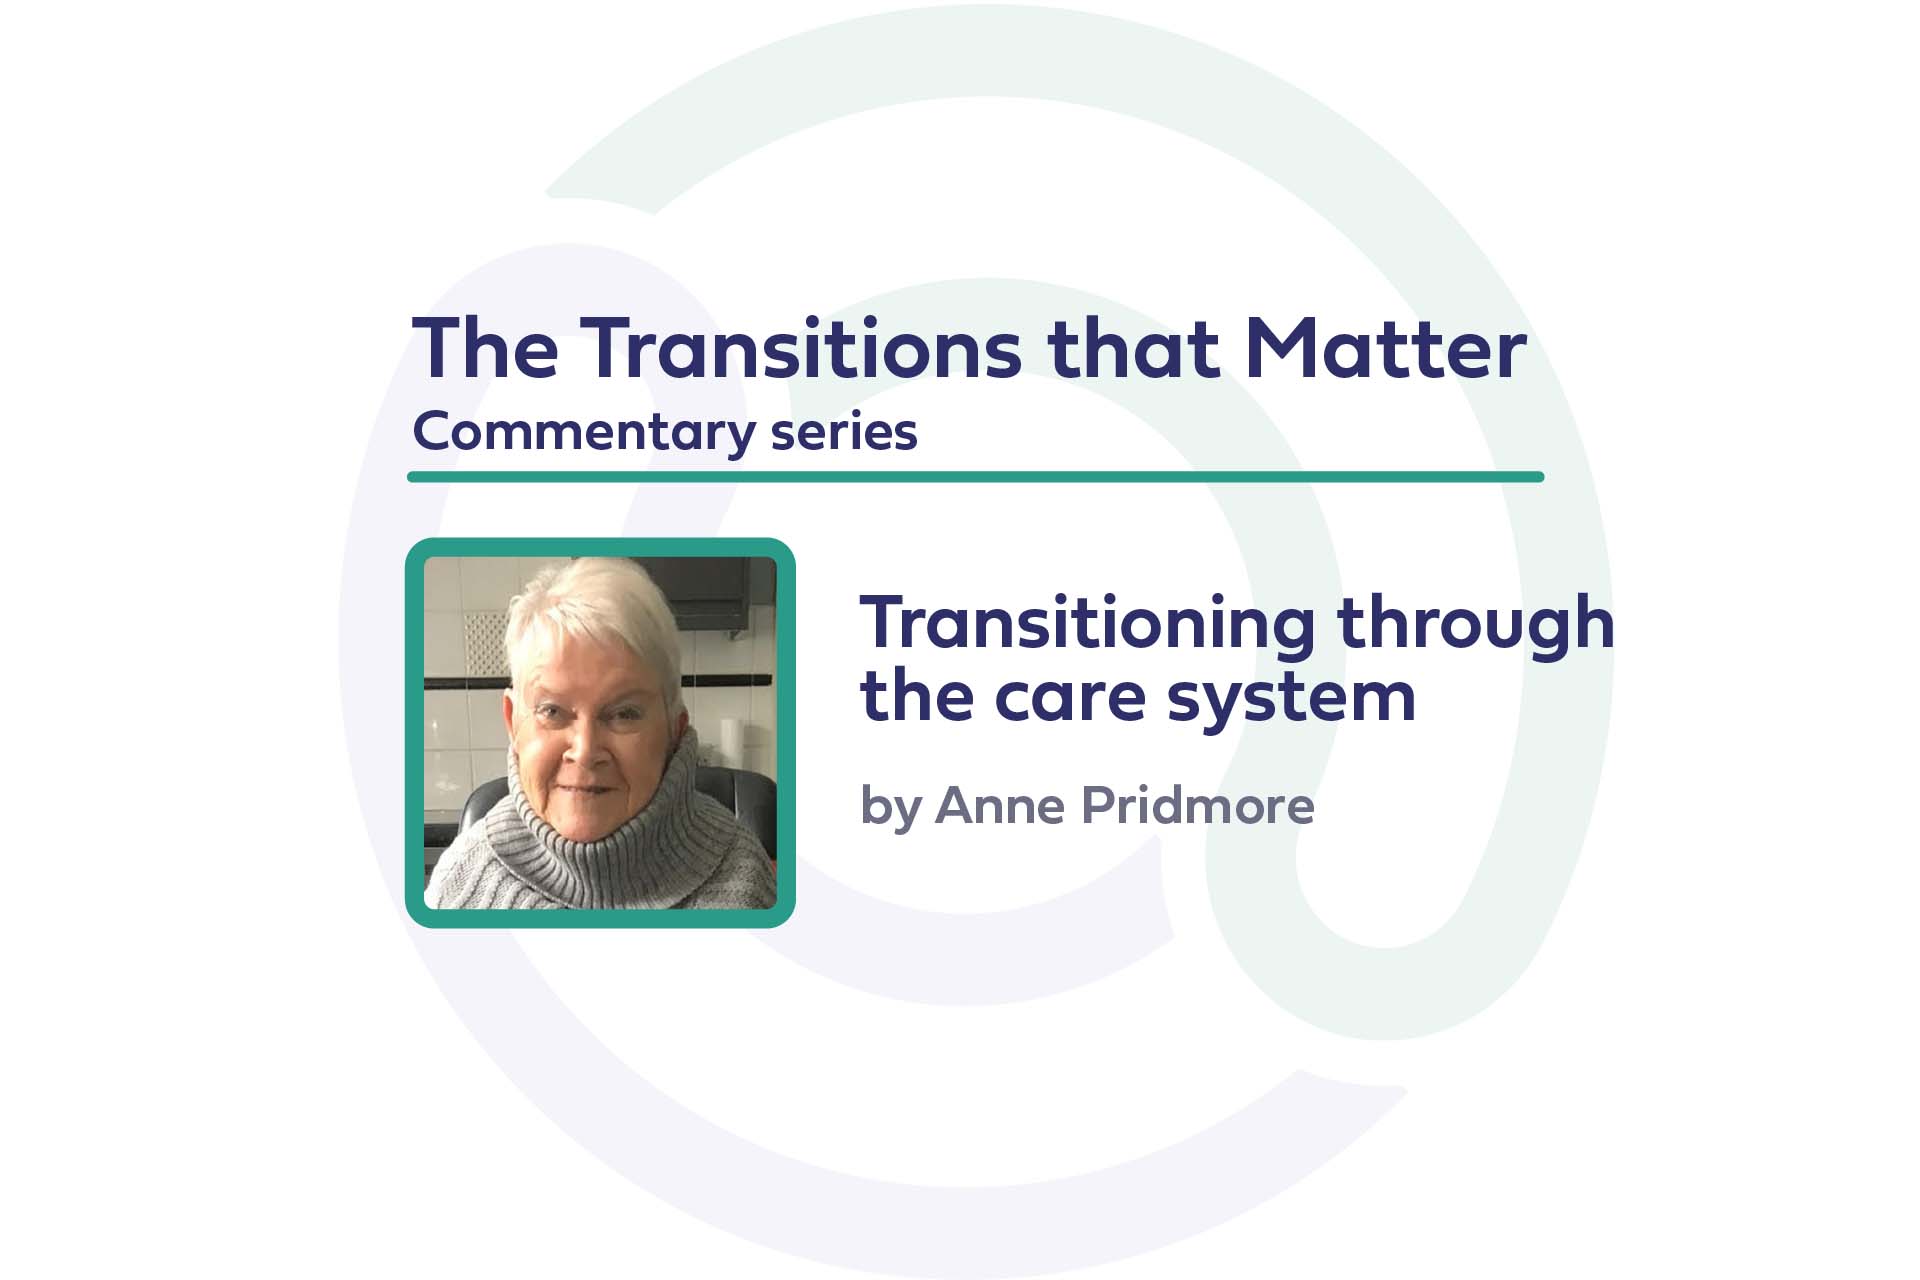 Anne Pridmore profile picture with text: "The transitions that matter Commentary series, 'Transitioning through the care system', by Anne Pridmore"